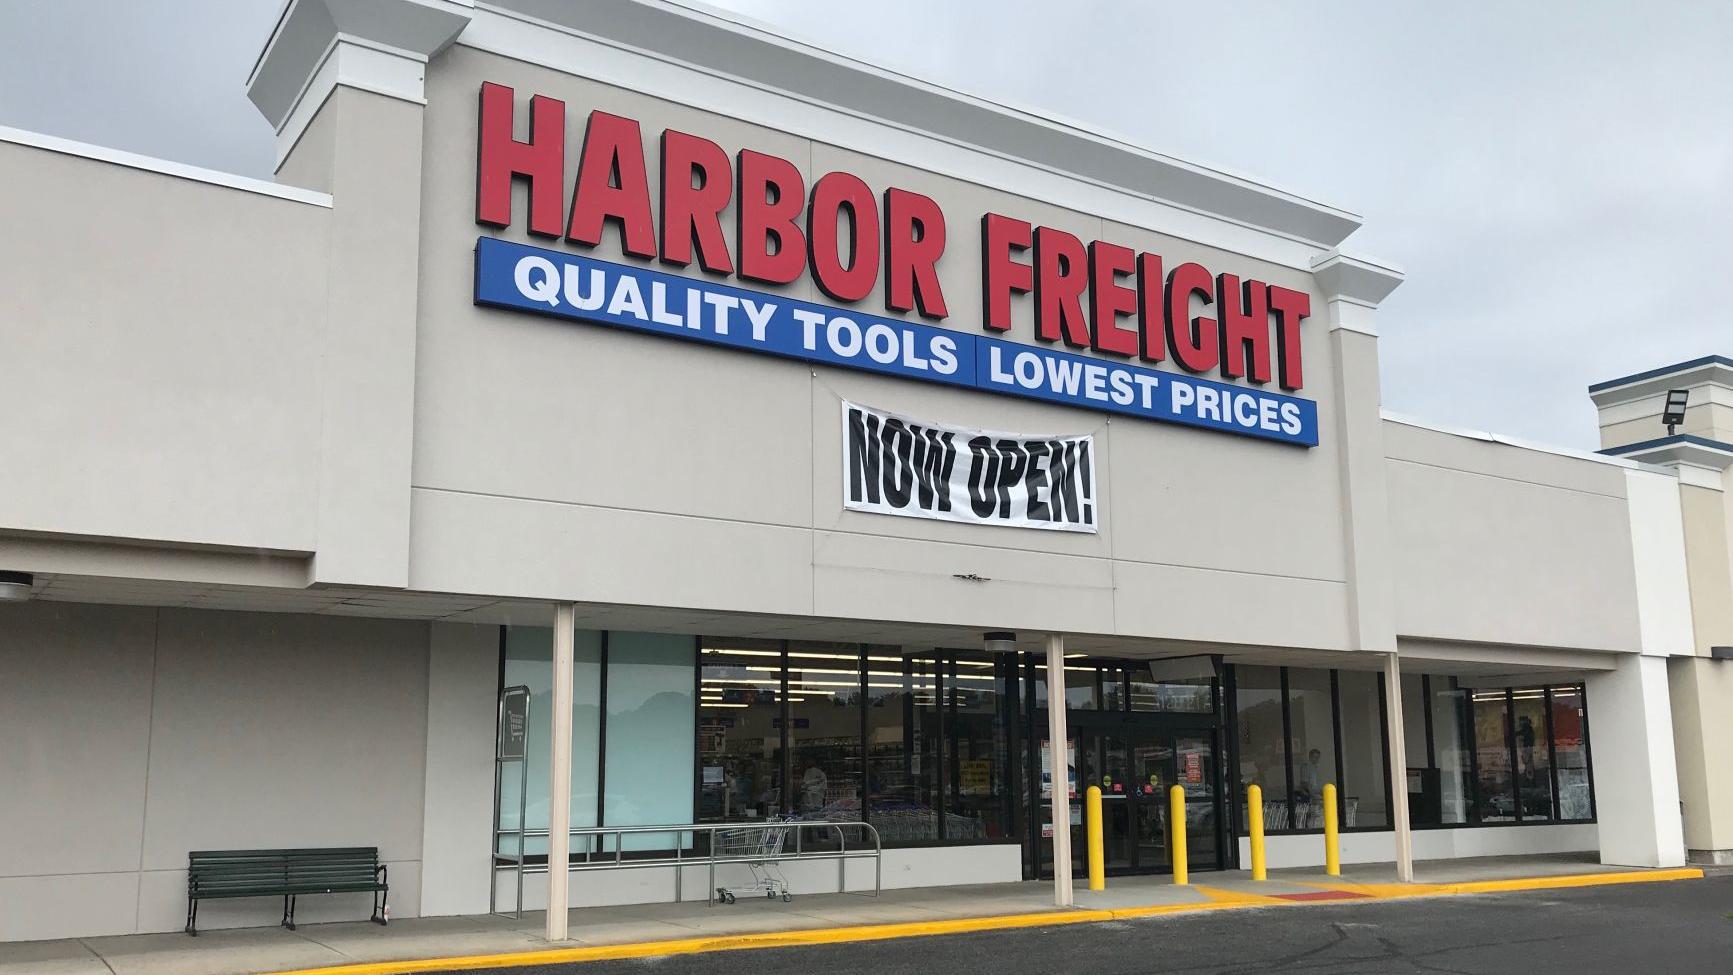 Harbor Freight Opens In Auburn Giveaway Planned Local News Auburn Ny Auburnpub Com Auburnpub Com